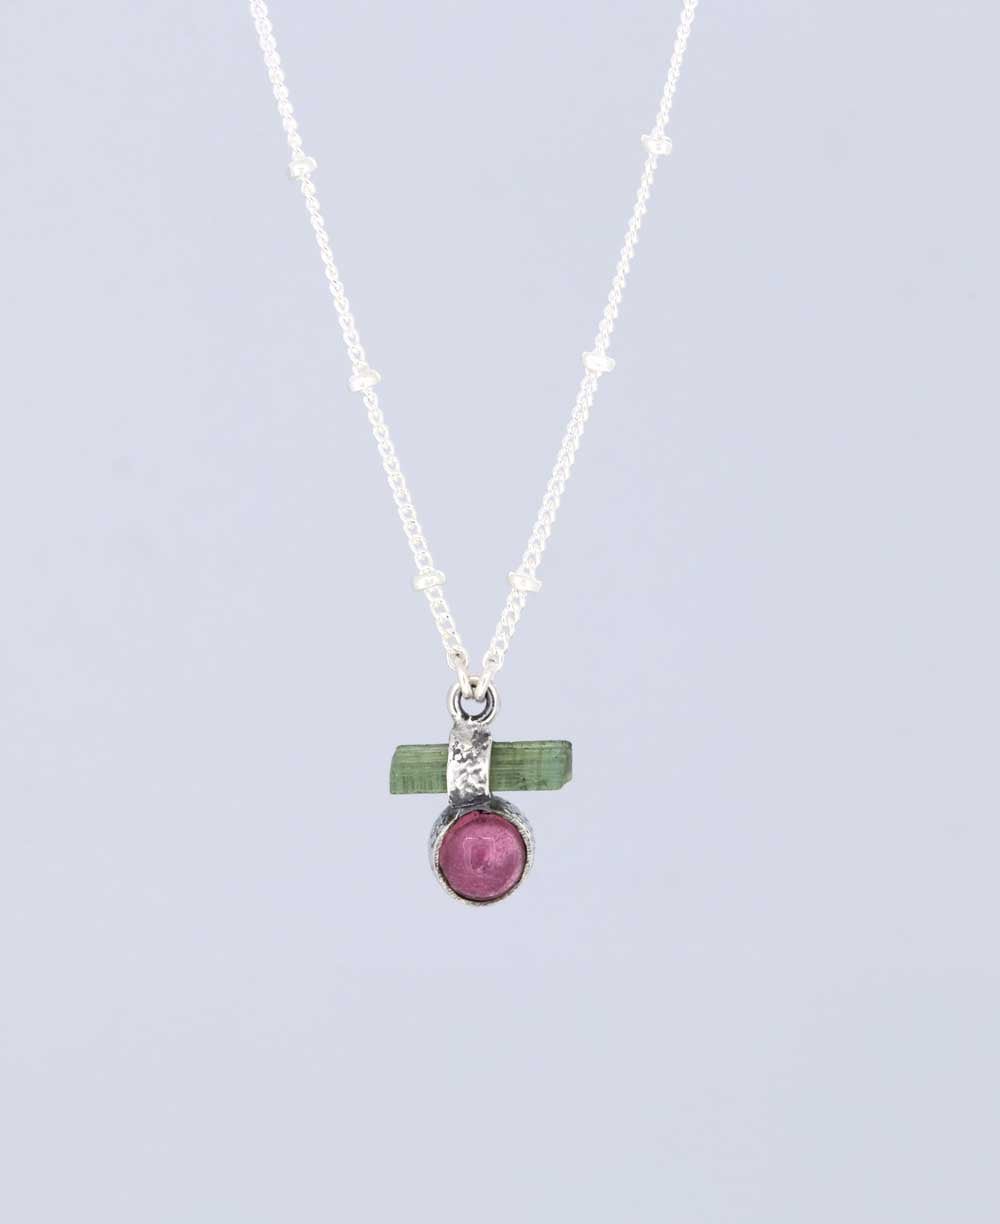 Zen Inspired Sterling Silver and Tourmaline Dainty Necklace - Necklaces